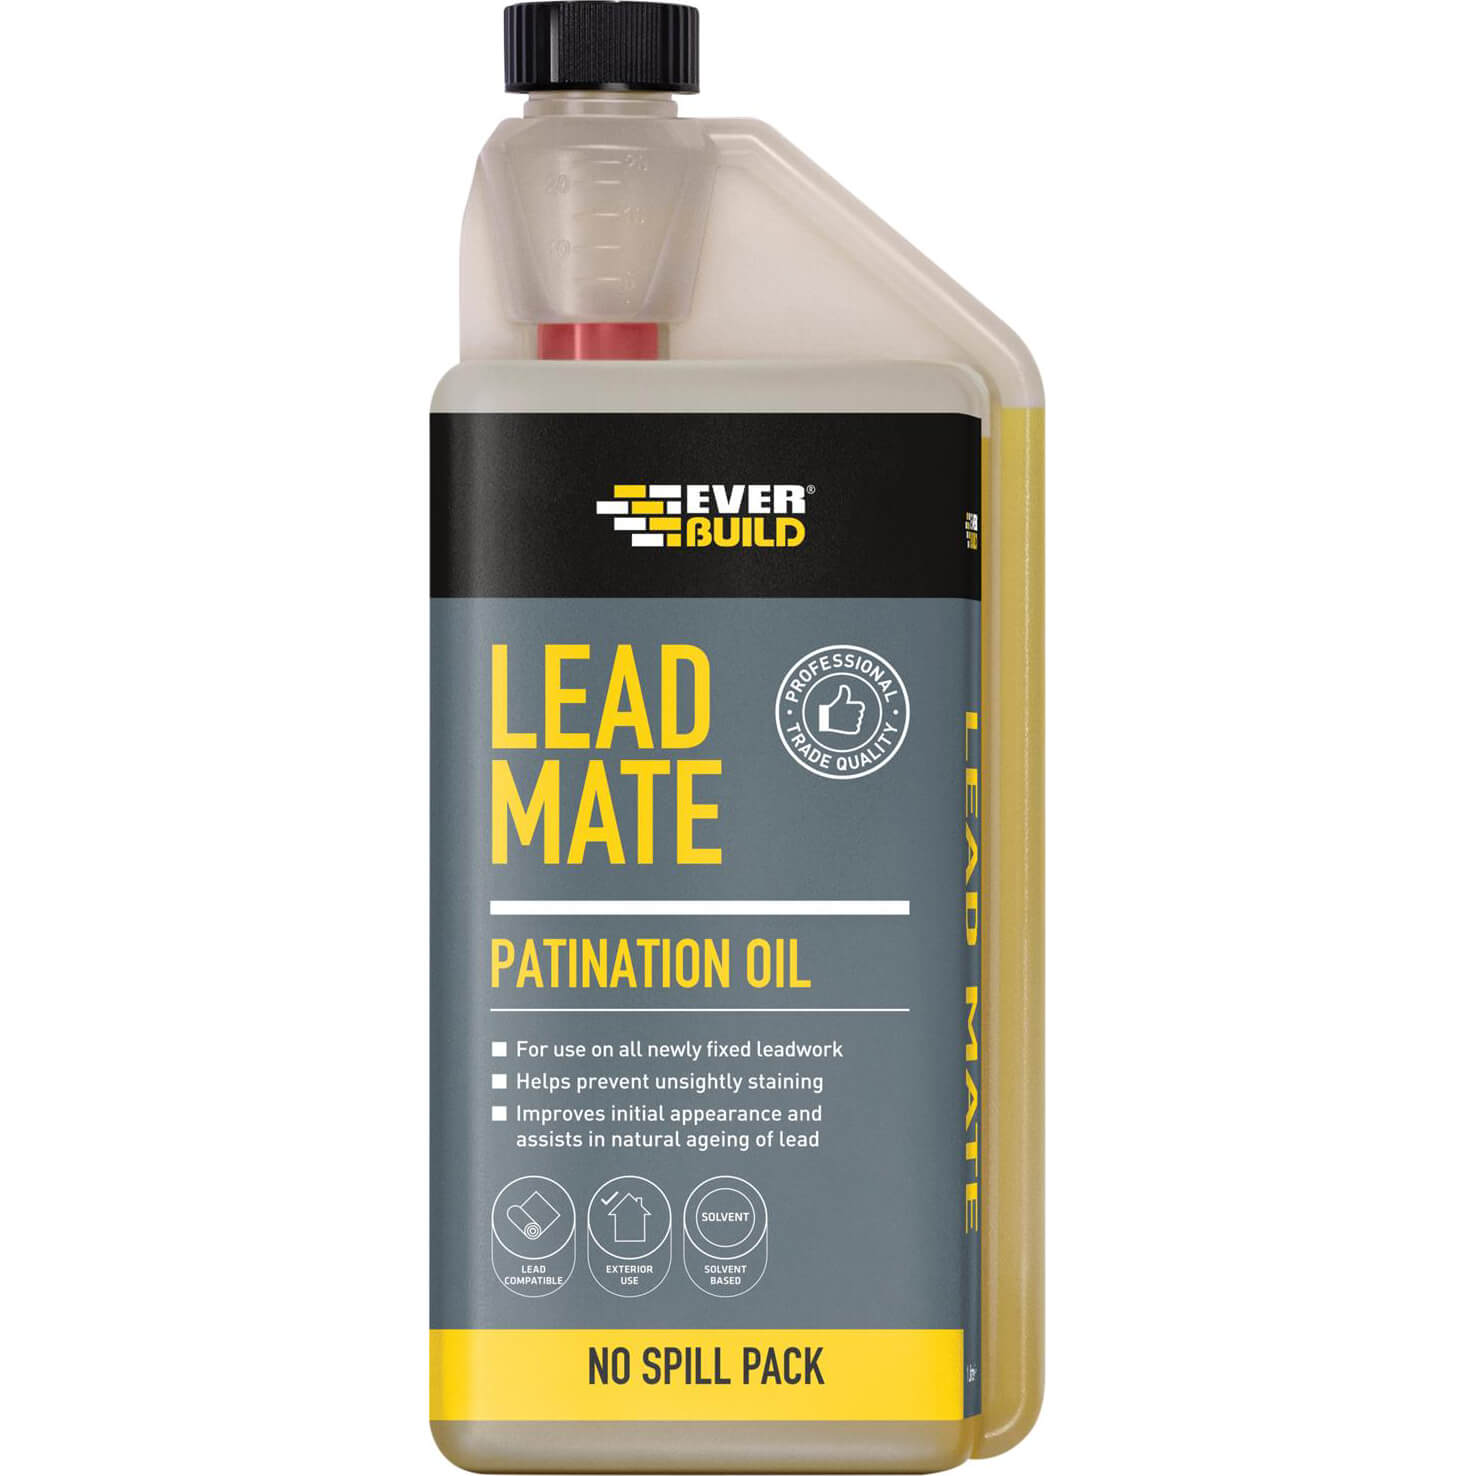 Image of Everbuild Lead Mate Patination Oil 1l